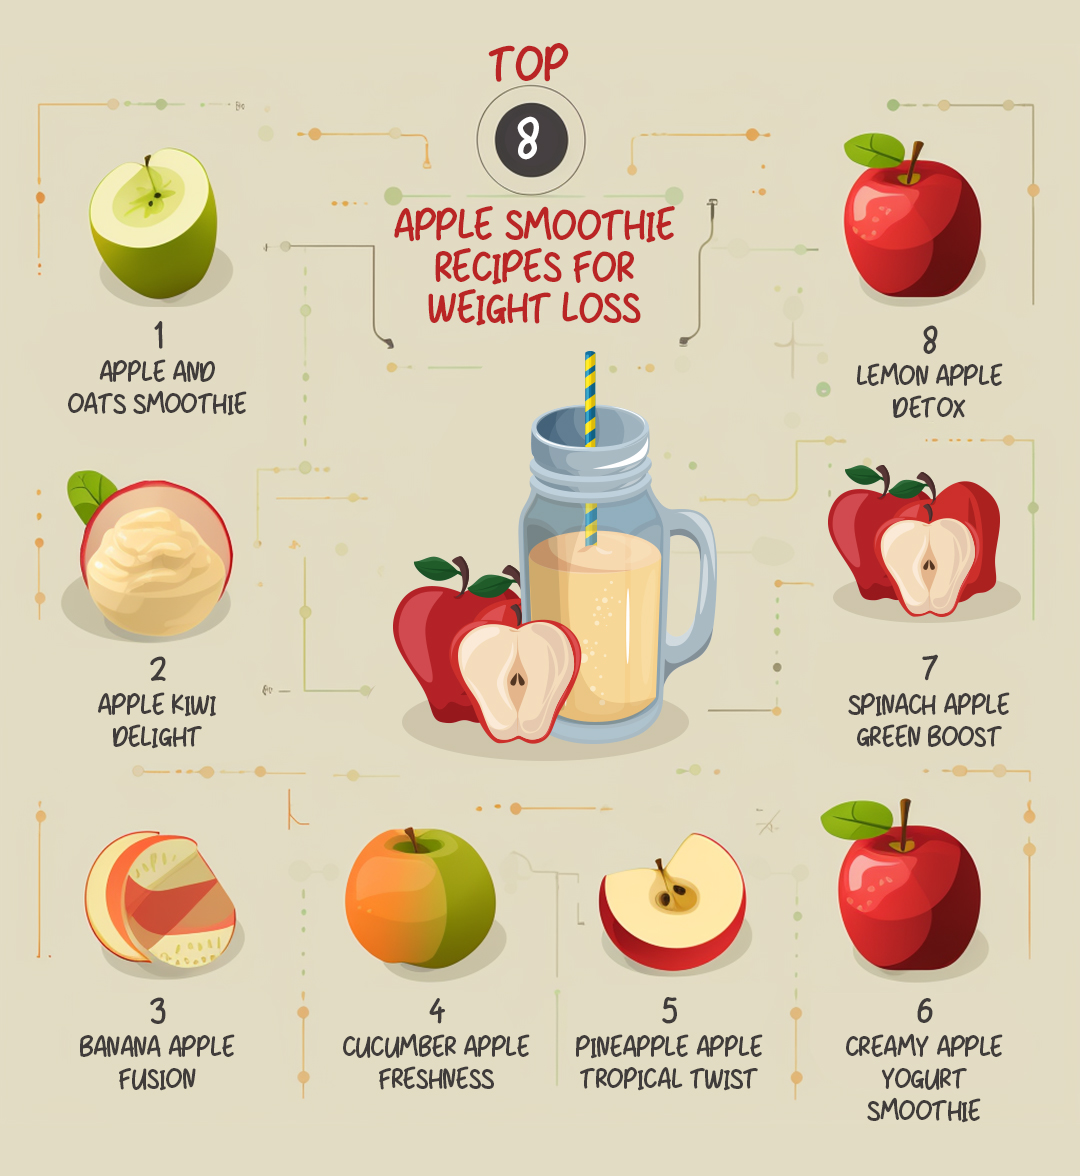 My Top 3 Weight Loss Smoothie Recipes